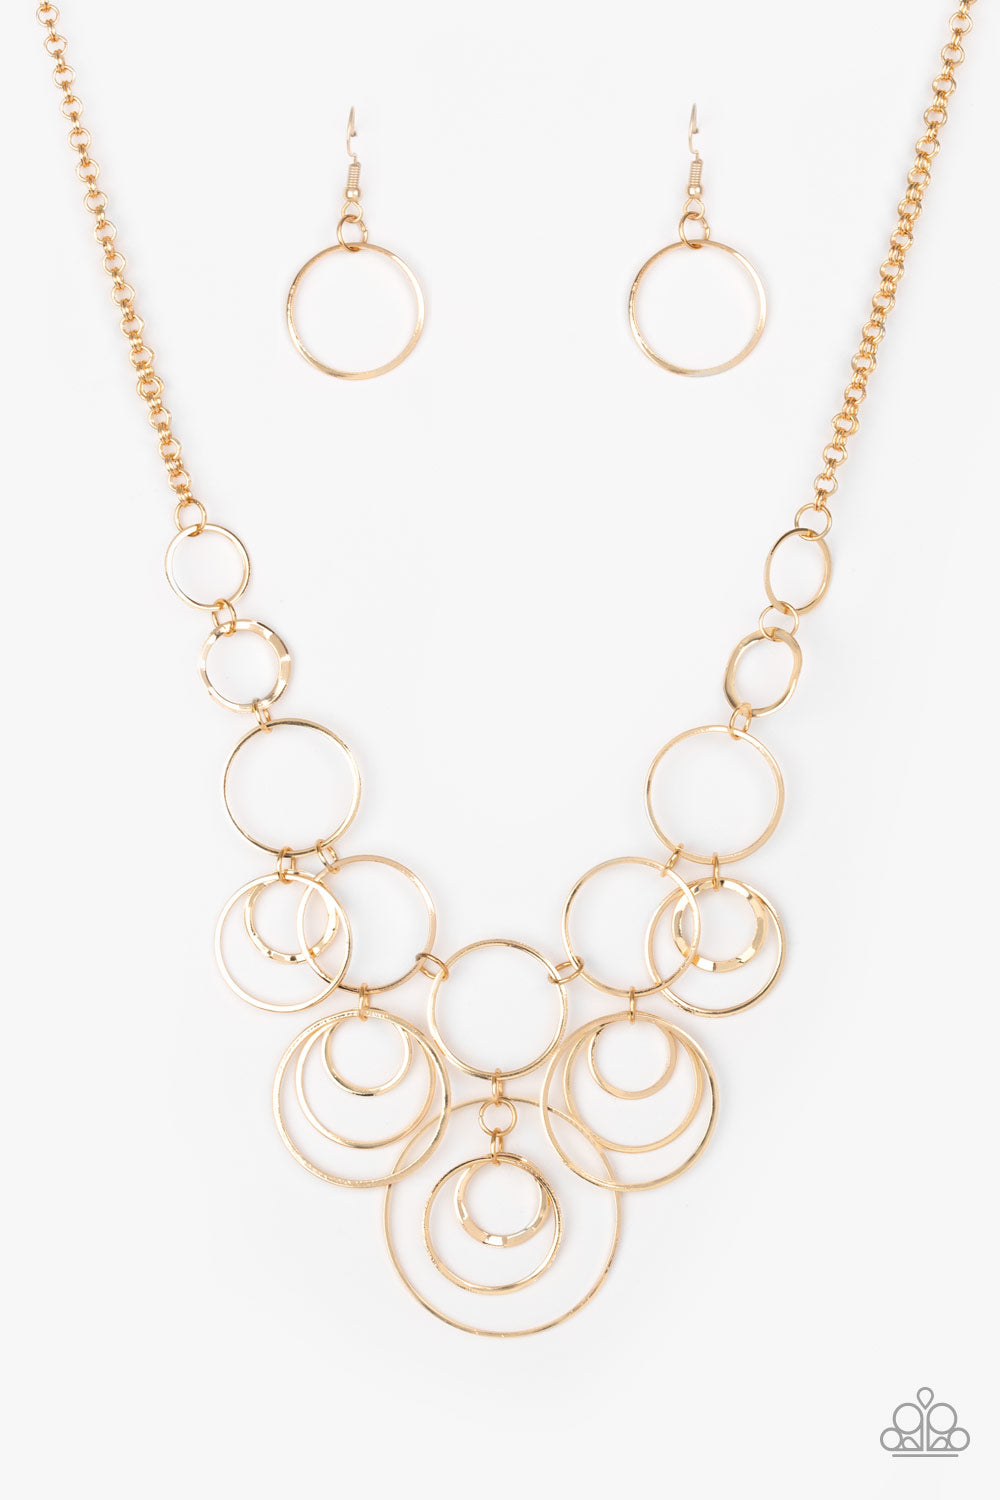 Break the Cycle - gold - Paparazzi necklace